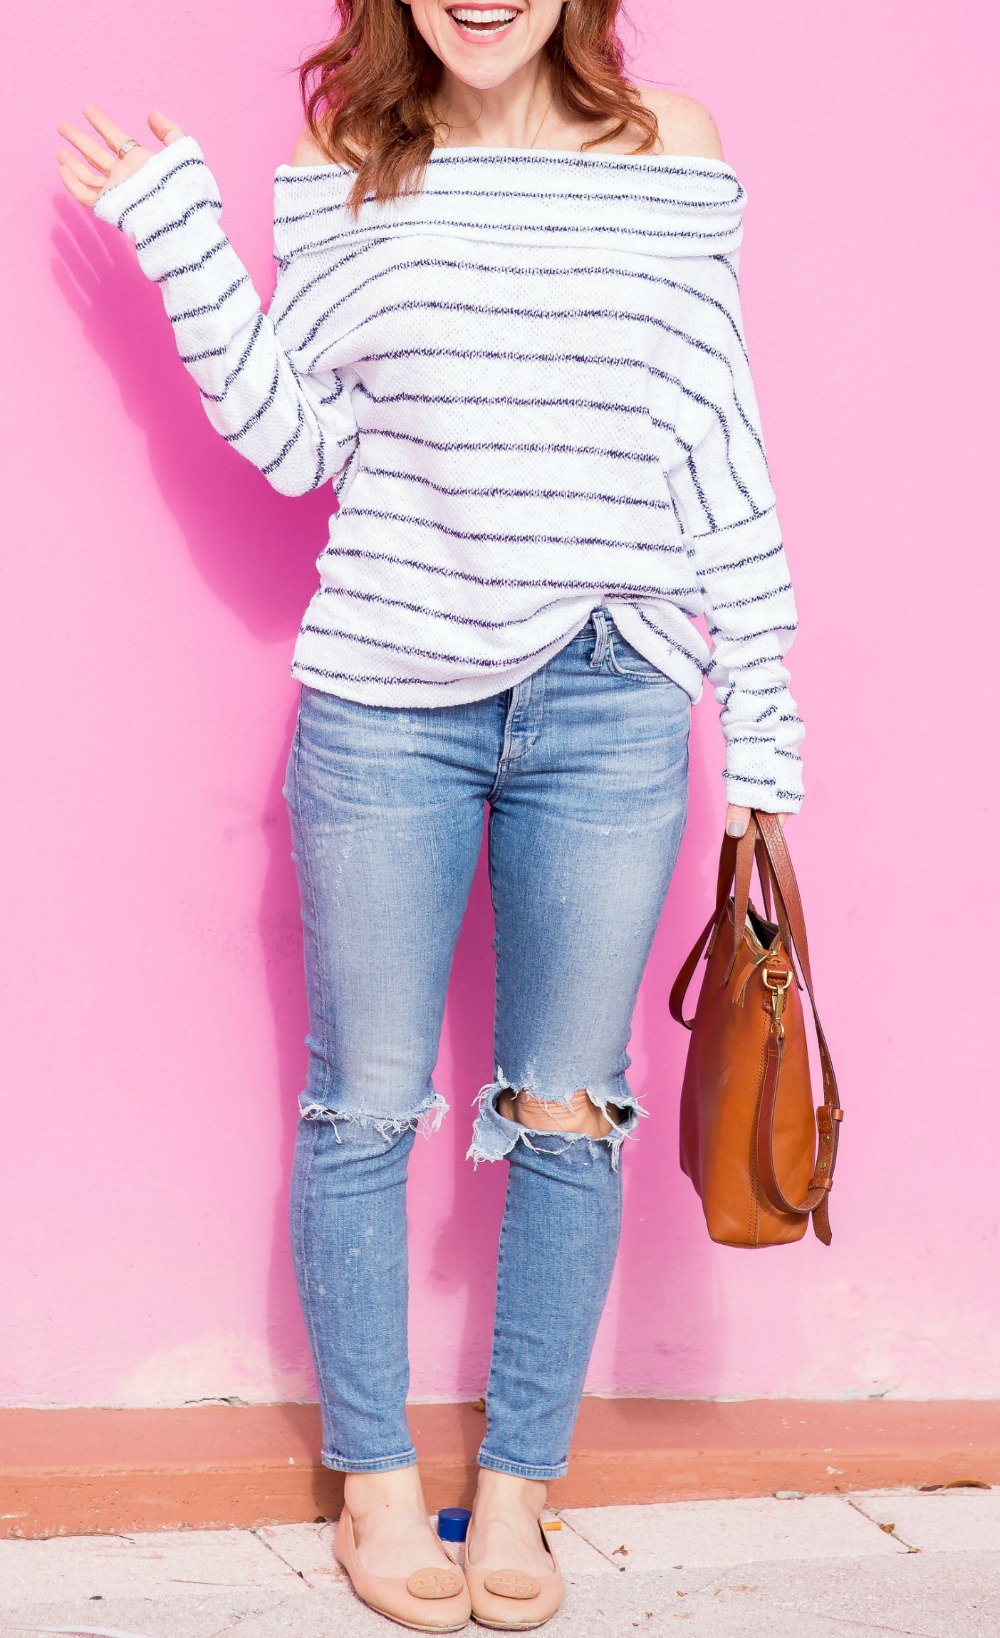 Spring style formula: striped off-the-shoulder sweater, distressed denim & neutral accessories - the most versatile striped top by popular Florida fashion blogger The Modern Savvy